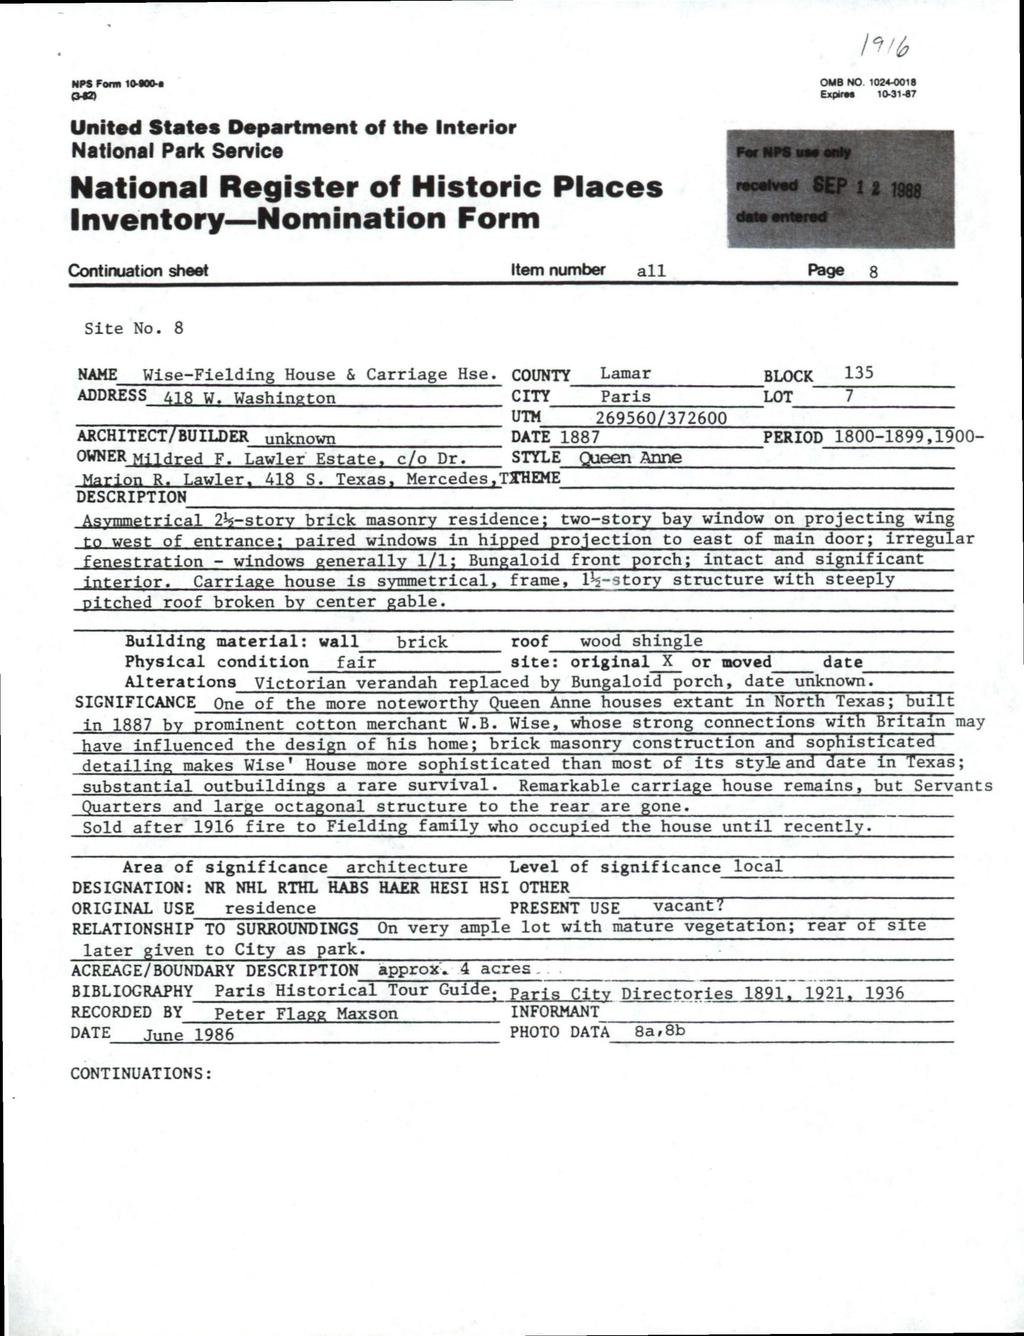 HPS fom 10-«00-i CMS United States Department of the Interior National Park Service National Register off Historic Piaces Inventory Nomination Form OMB NO 1024-0018 ExpirM 10-31.